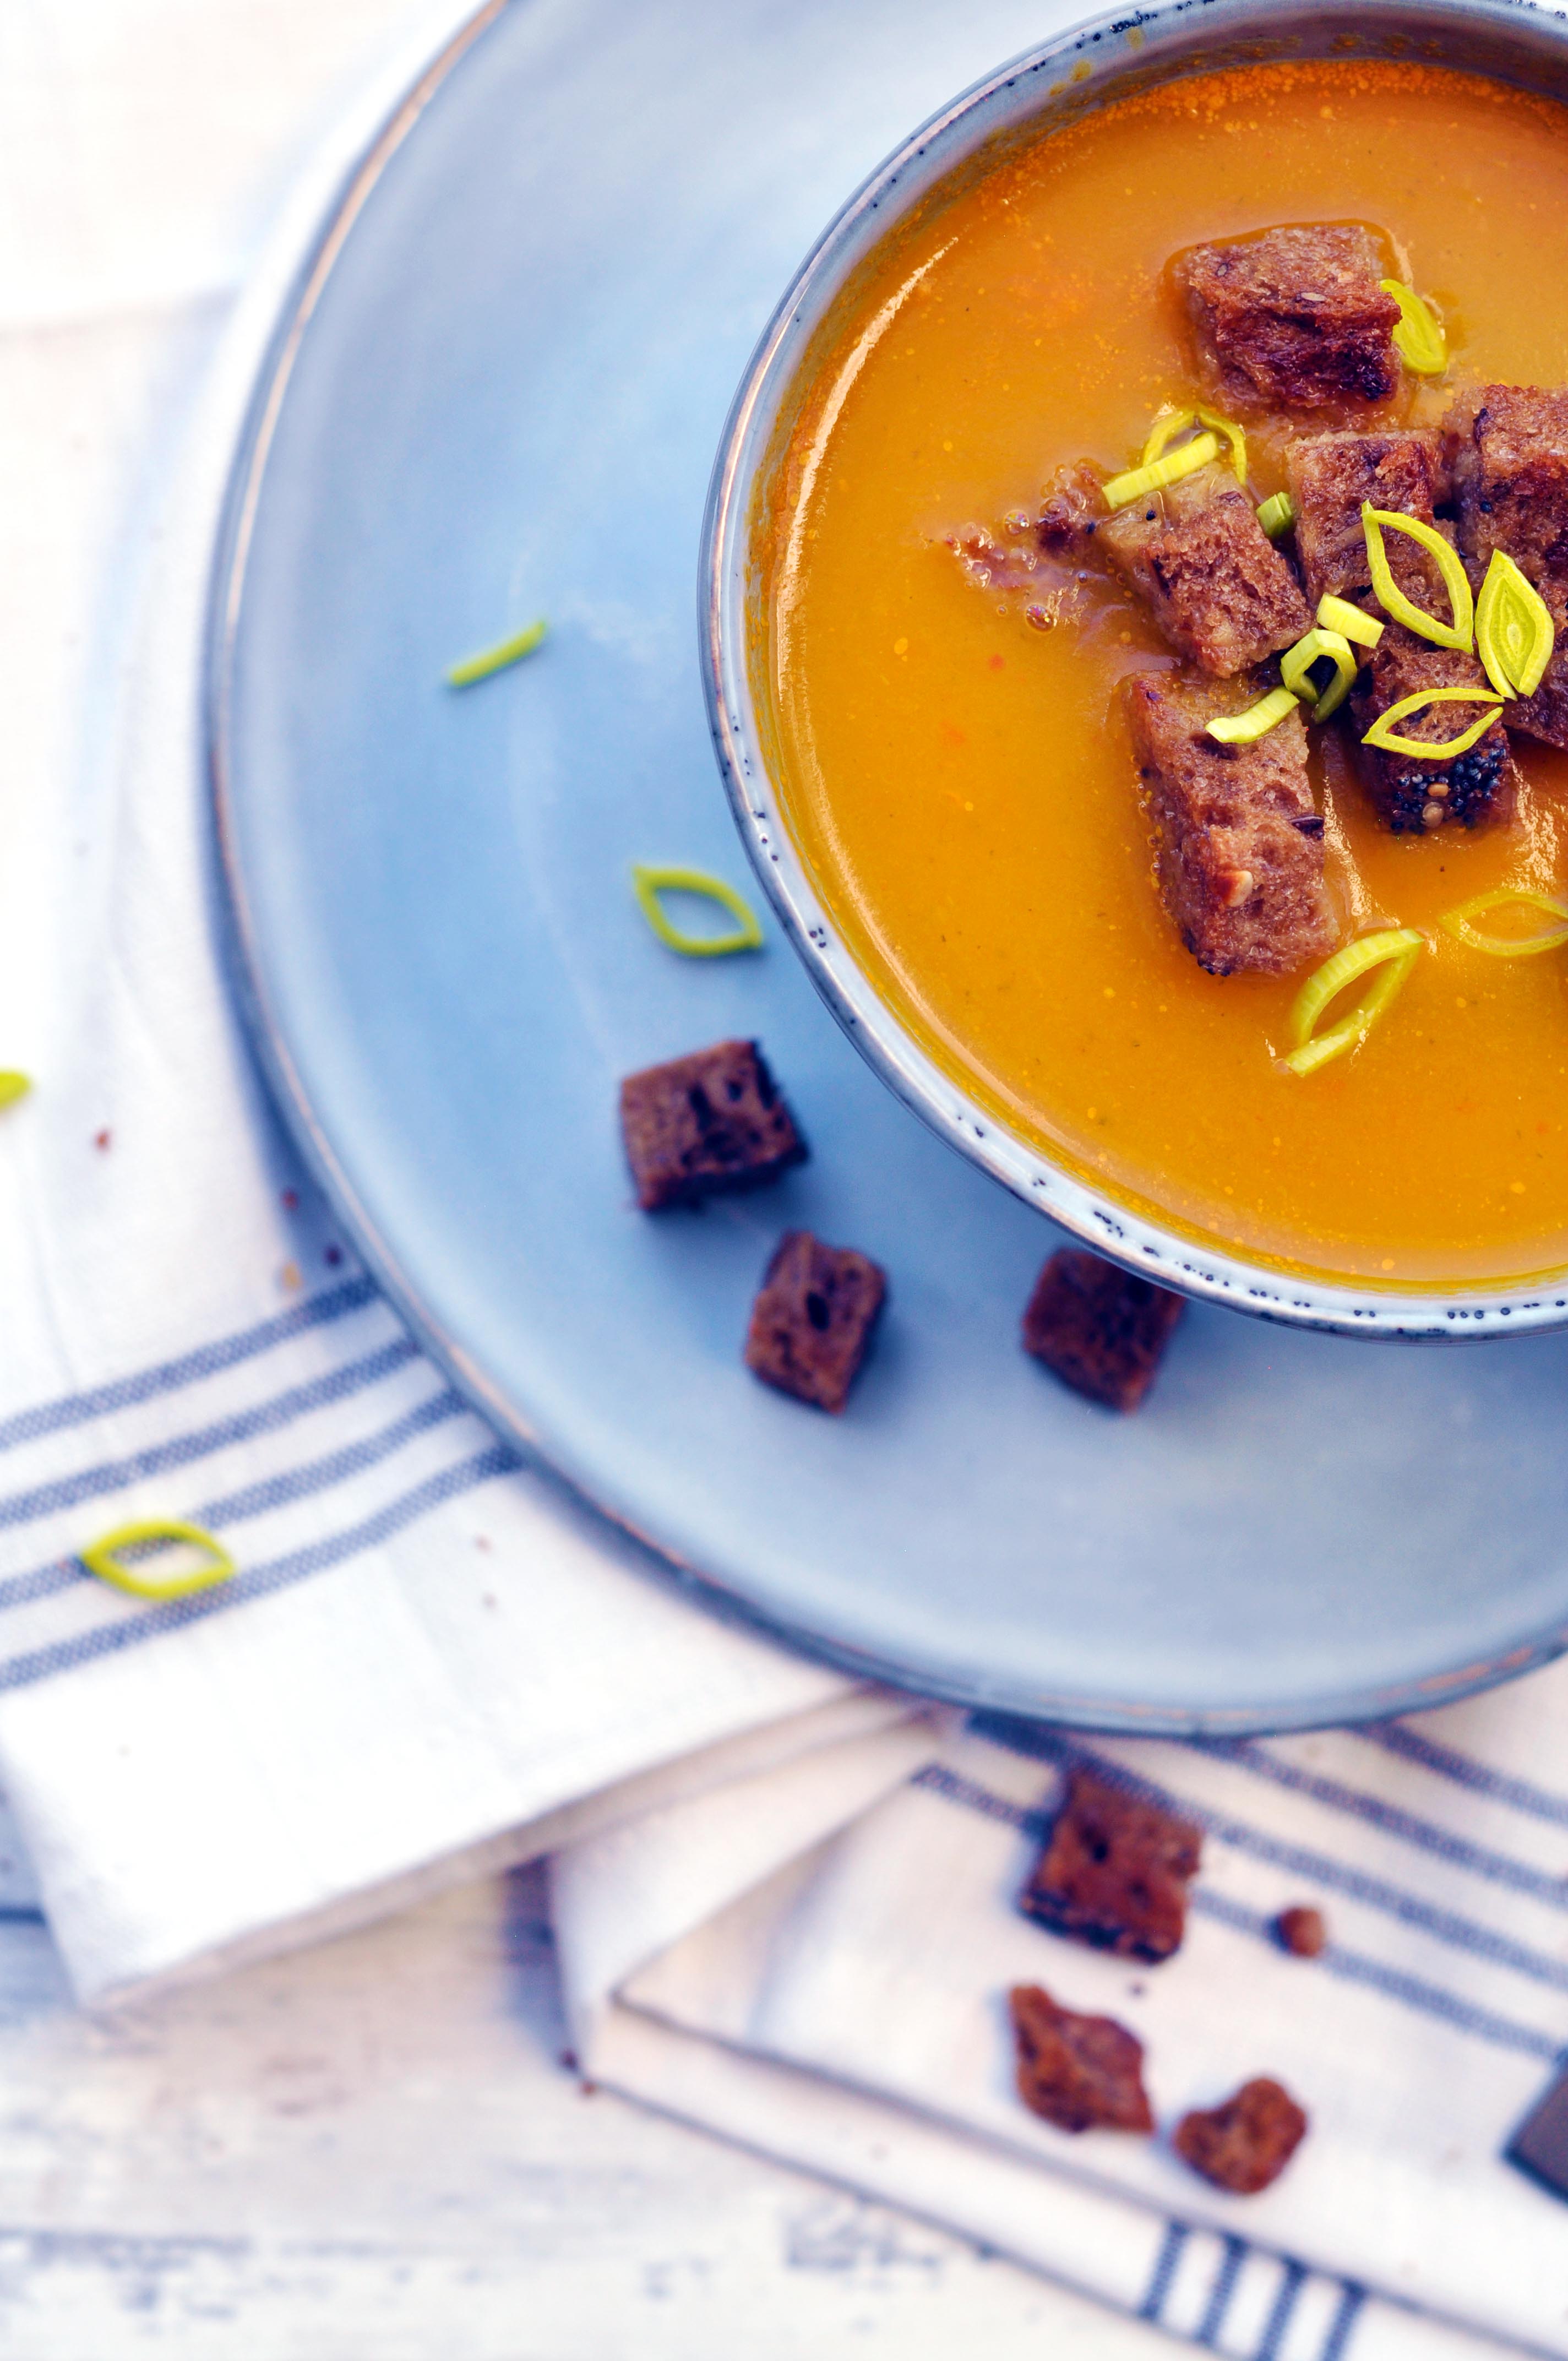 Histamine Friendly Pumpkin and Bell Pepper Soup